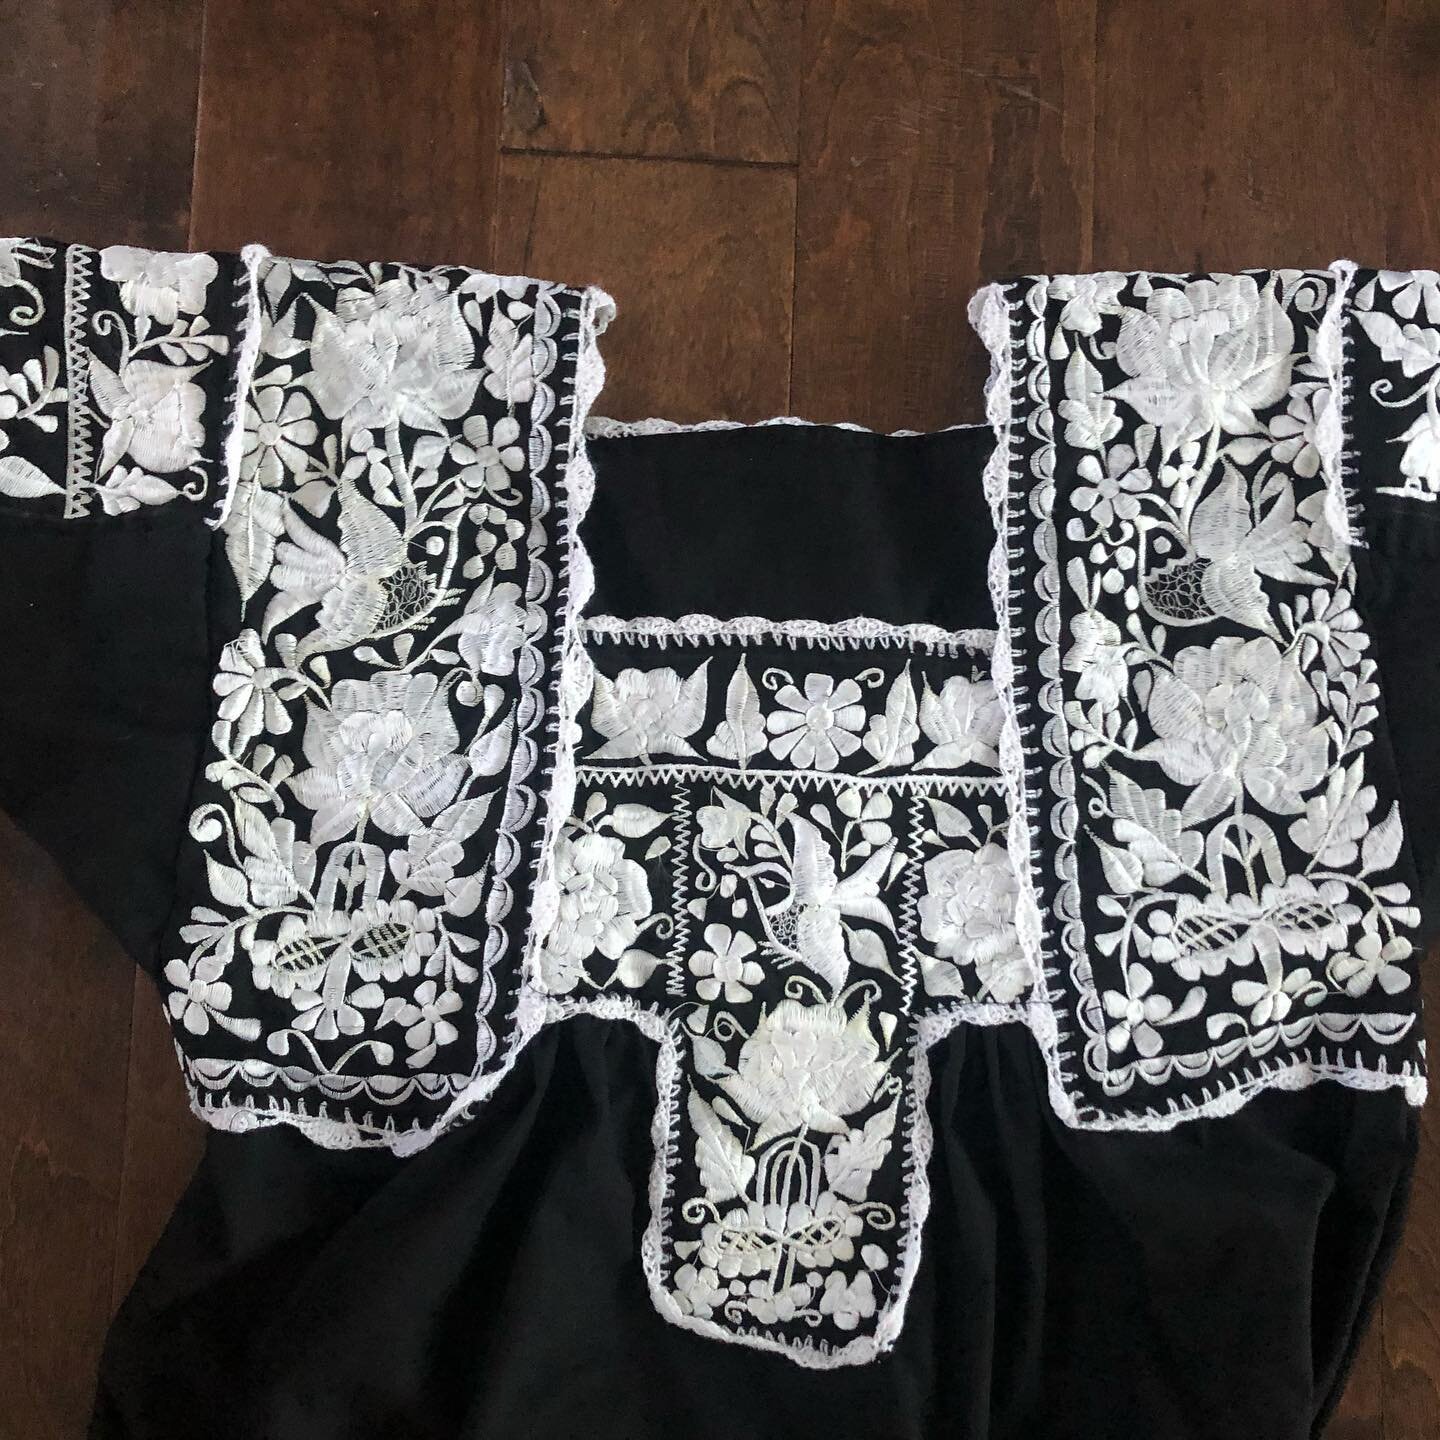 Nahua blouse from San Gabriel Chilac, also part of the traditional costume of China Poblana.  Beautiful blouse machine embroidered by collective made up of artisans from the Sierra Puebla.  Unique piece.

Worldwide shipping 
💸PayPal +3.5%
💸Venmo 
?